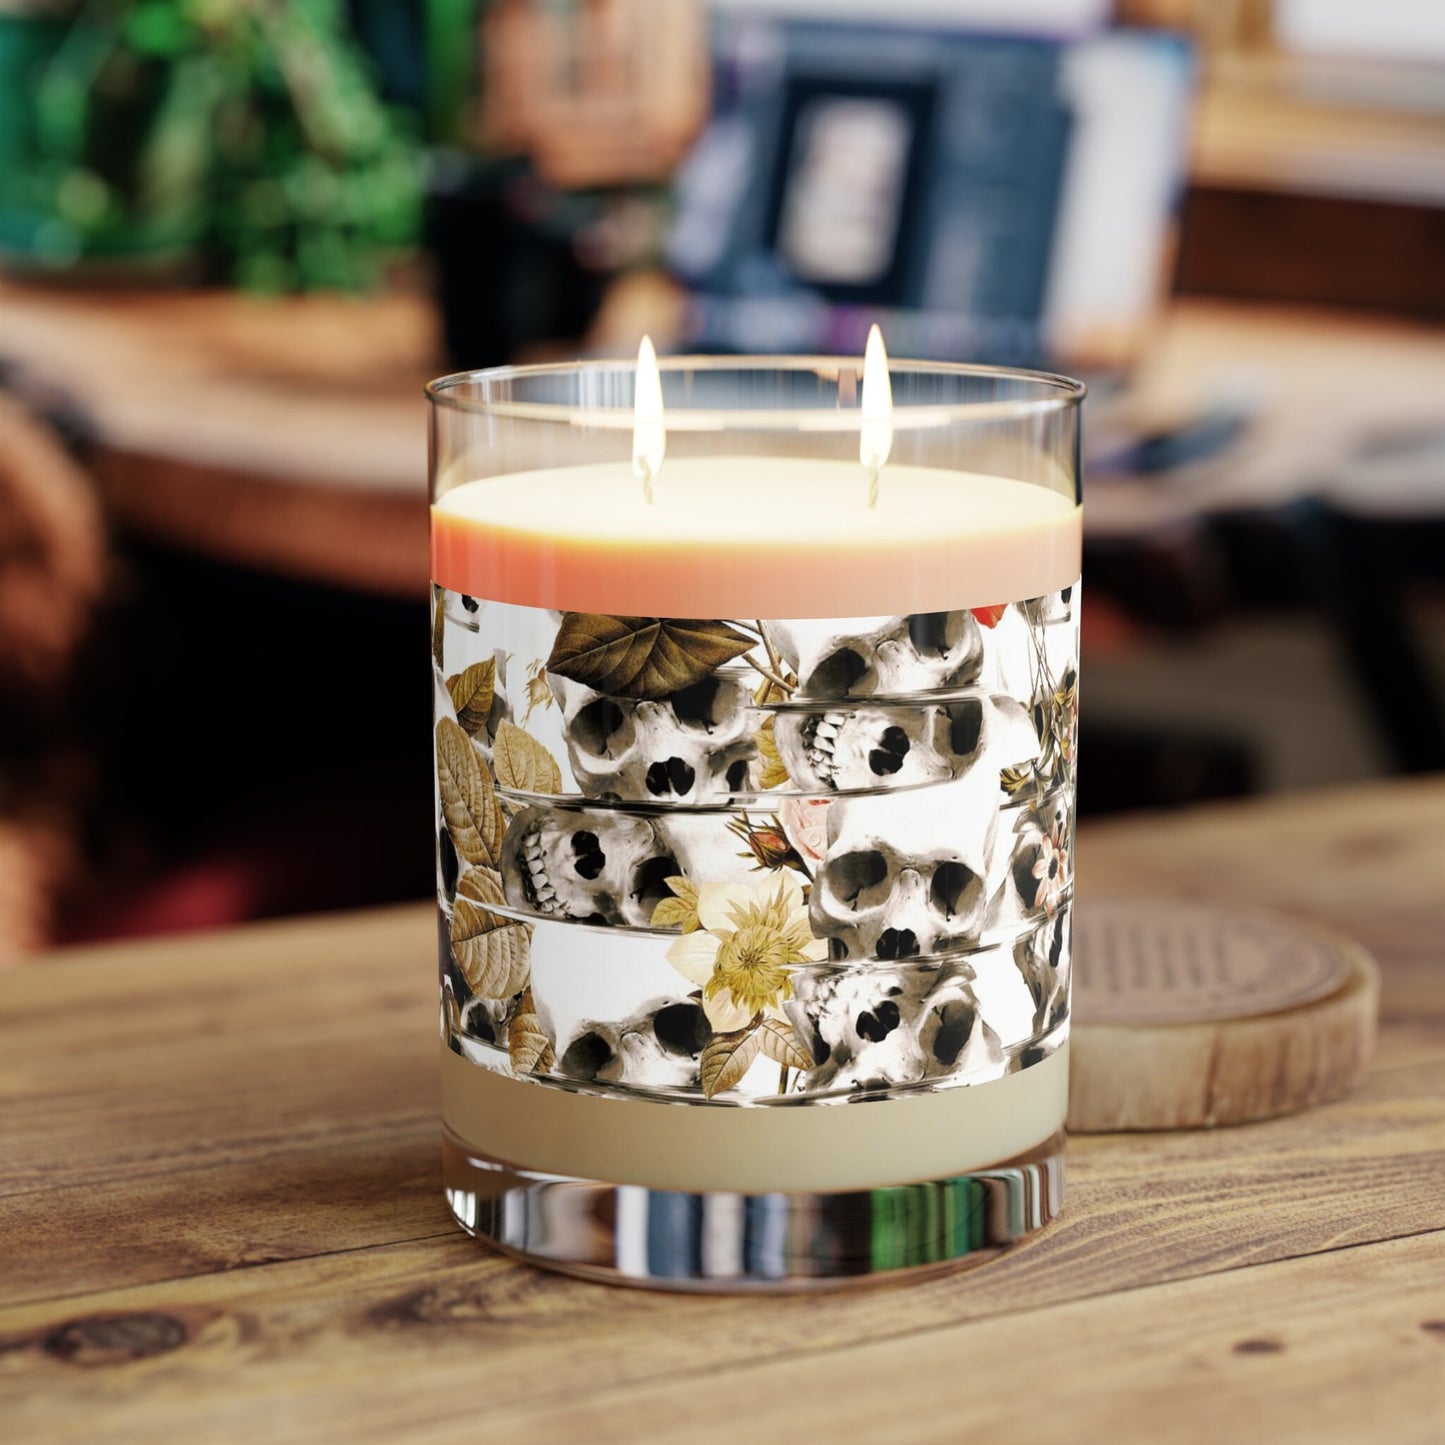 Skull Scented Candle - Full Glass, 11oz Sugar Skull Floral Pattern Candle Gift